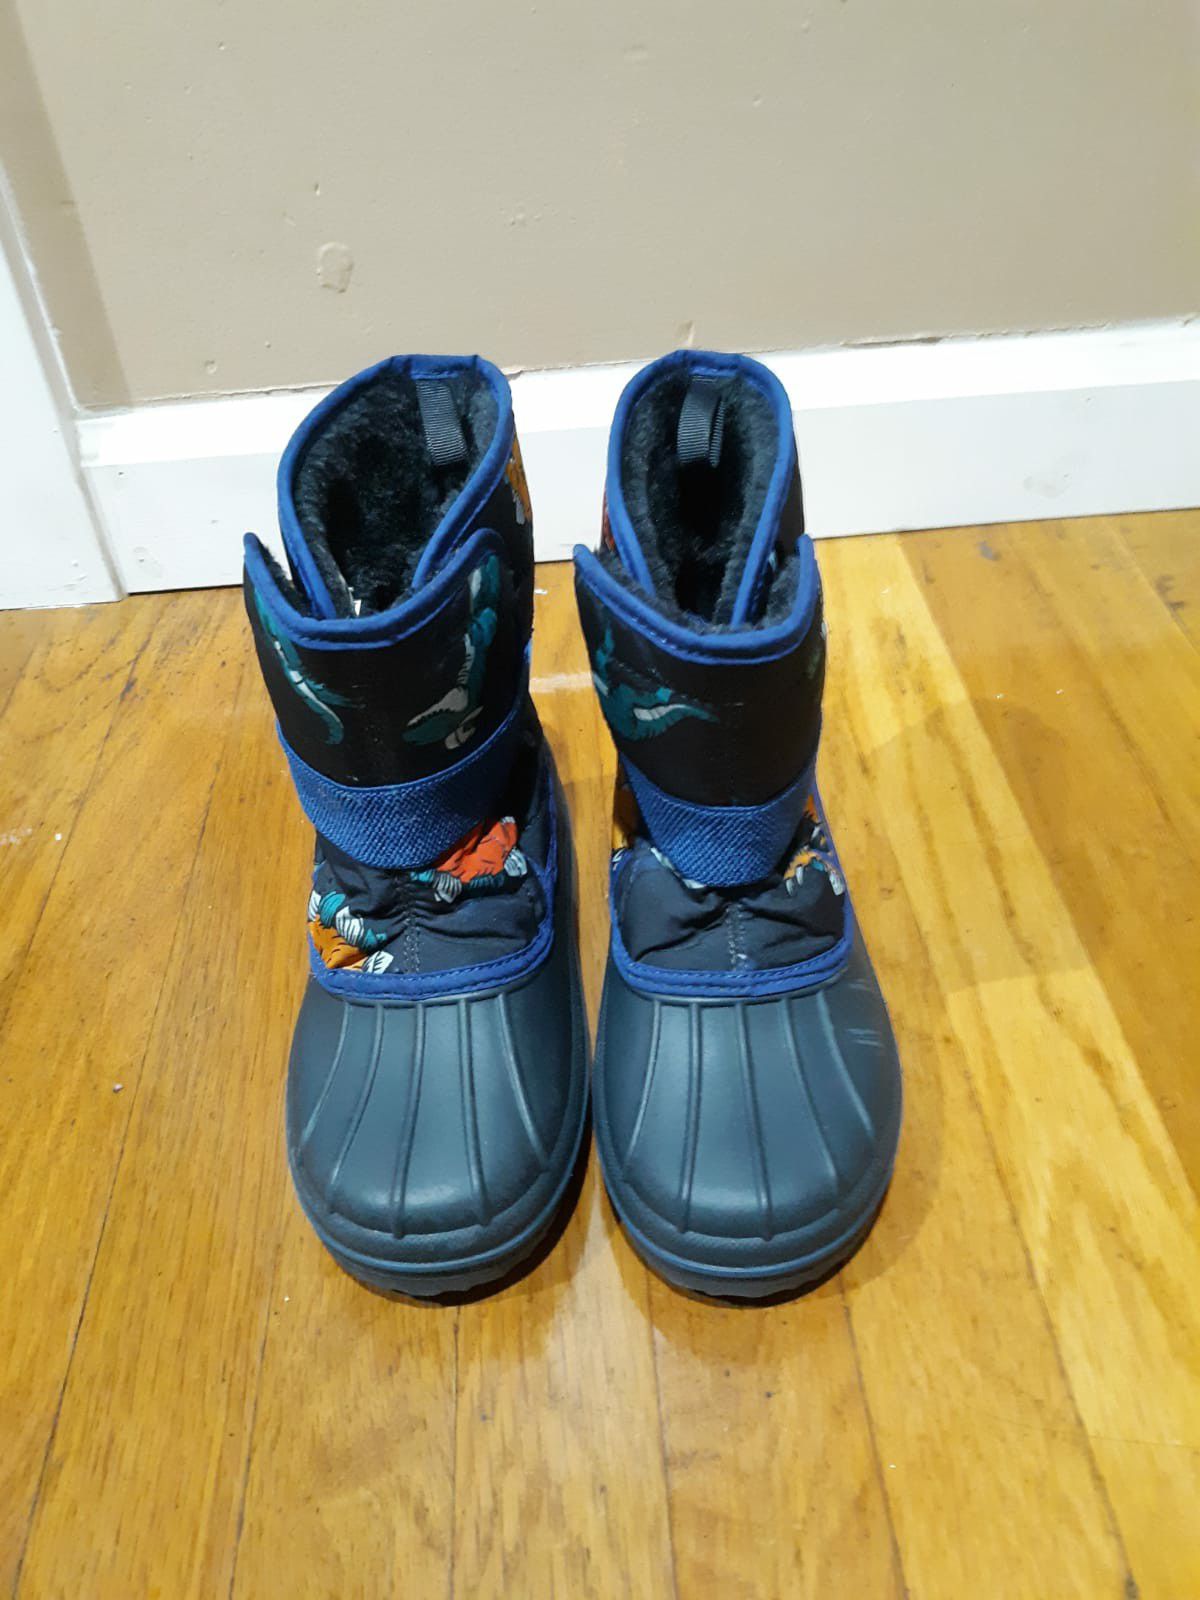 Snow boots for boys